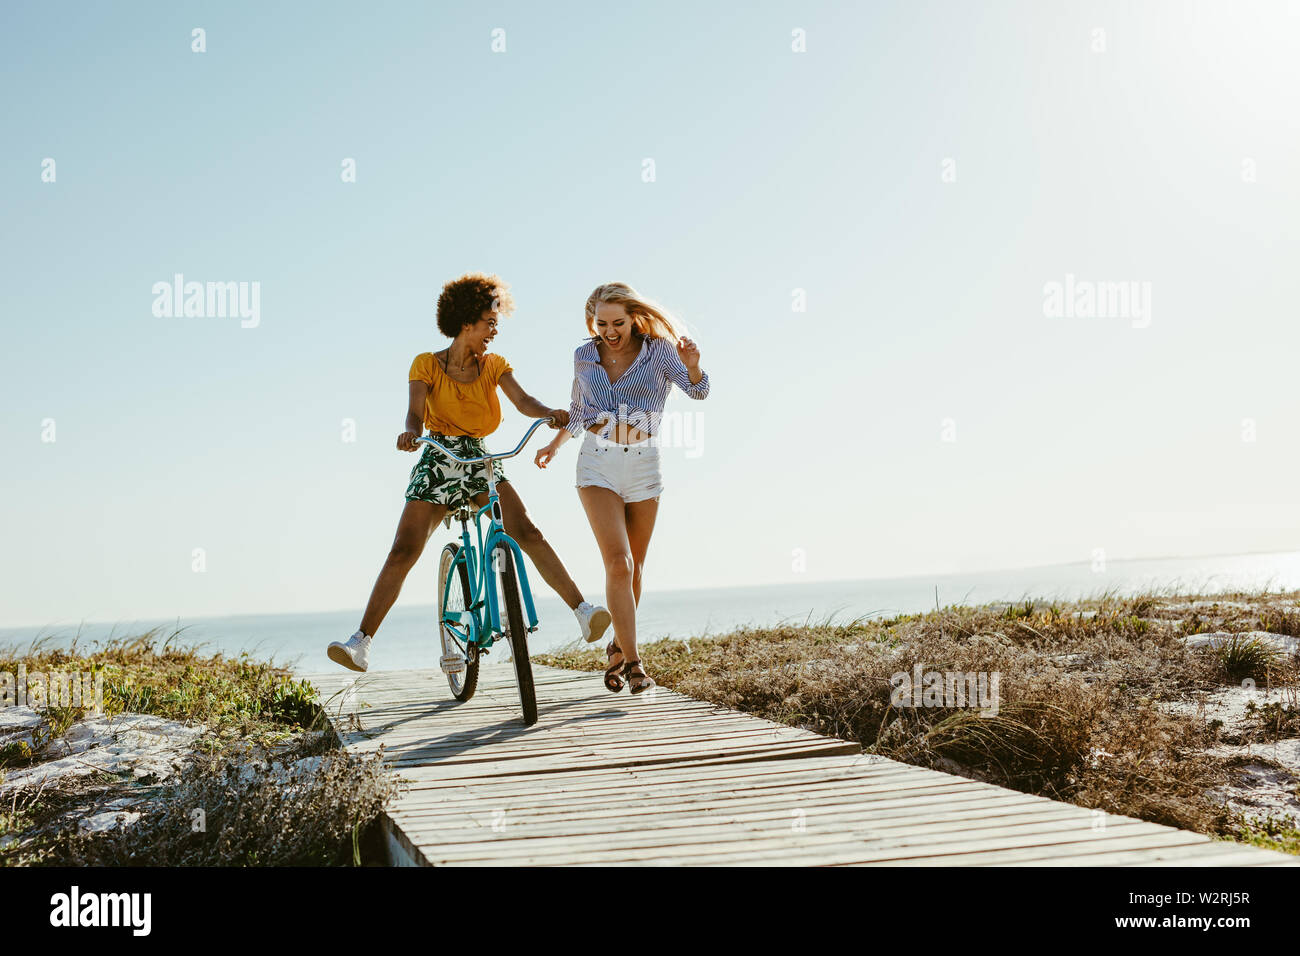 Two young women having fun with a bicycle at the beach. Woman running with friend riding a bike on boardwalk. Stock Photo